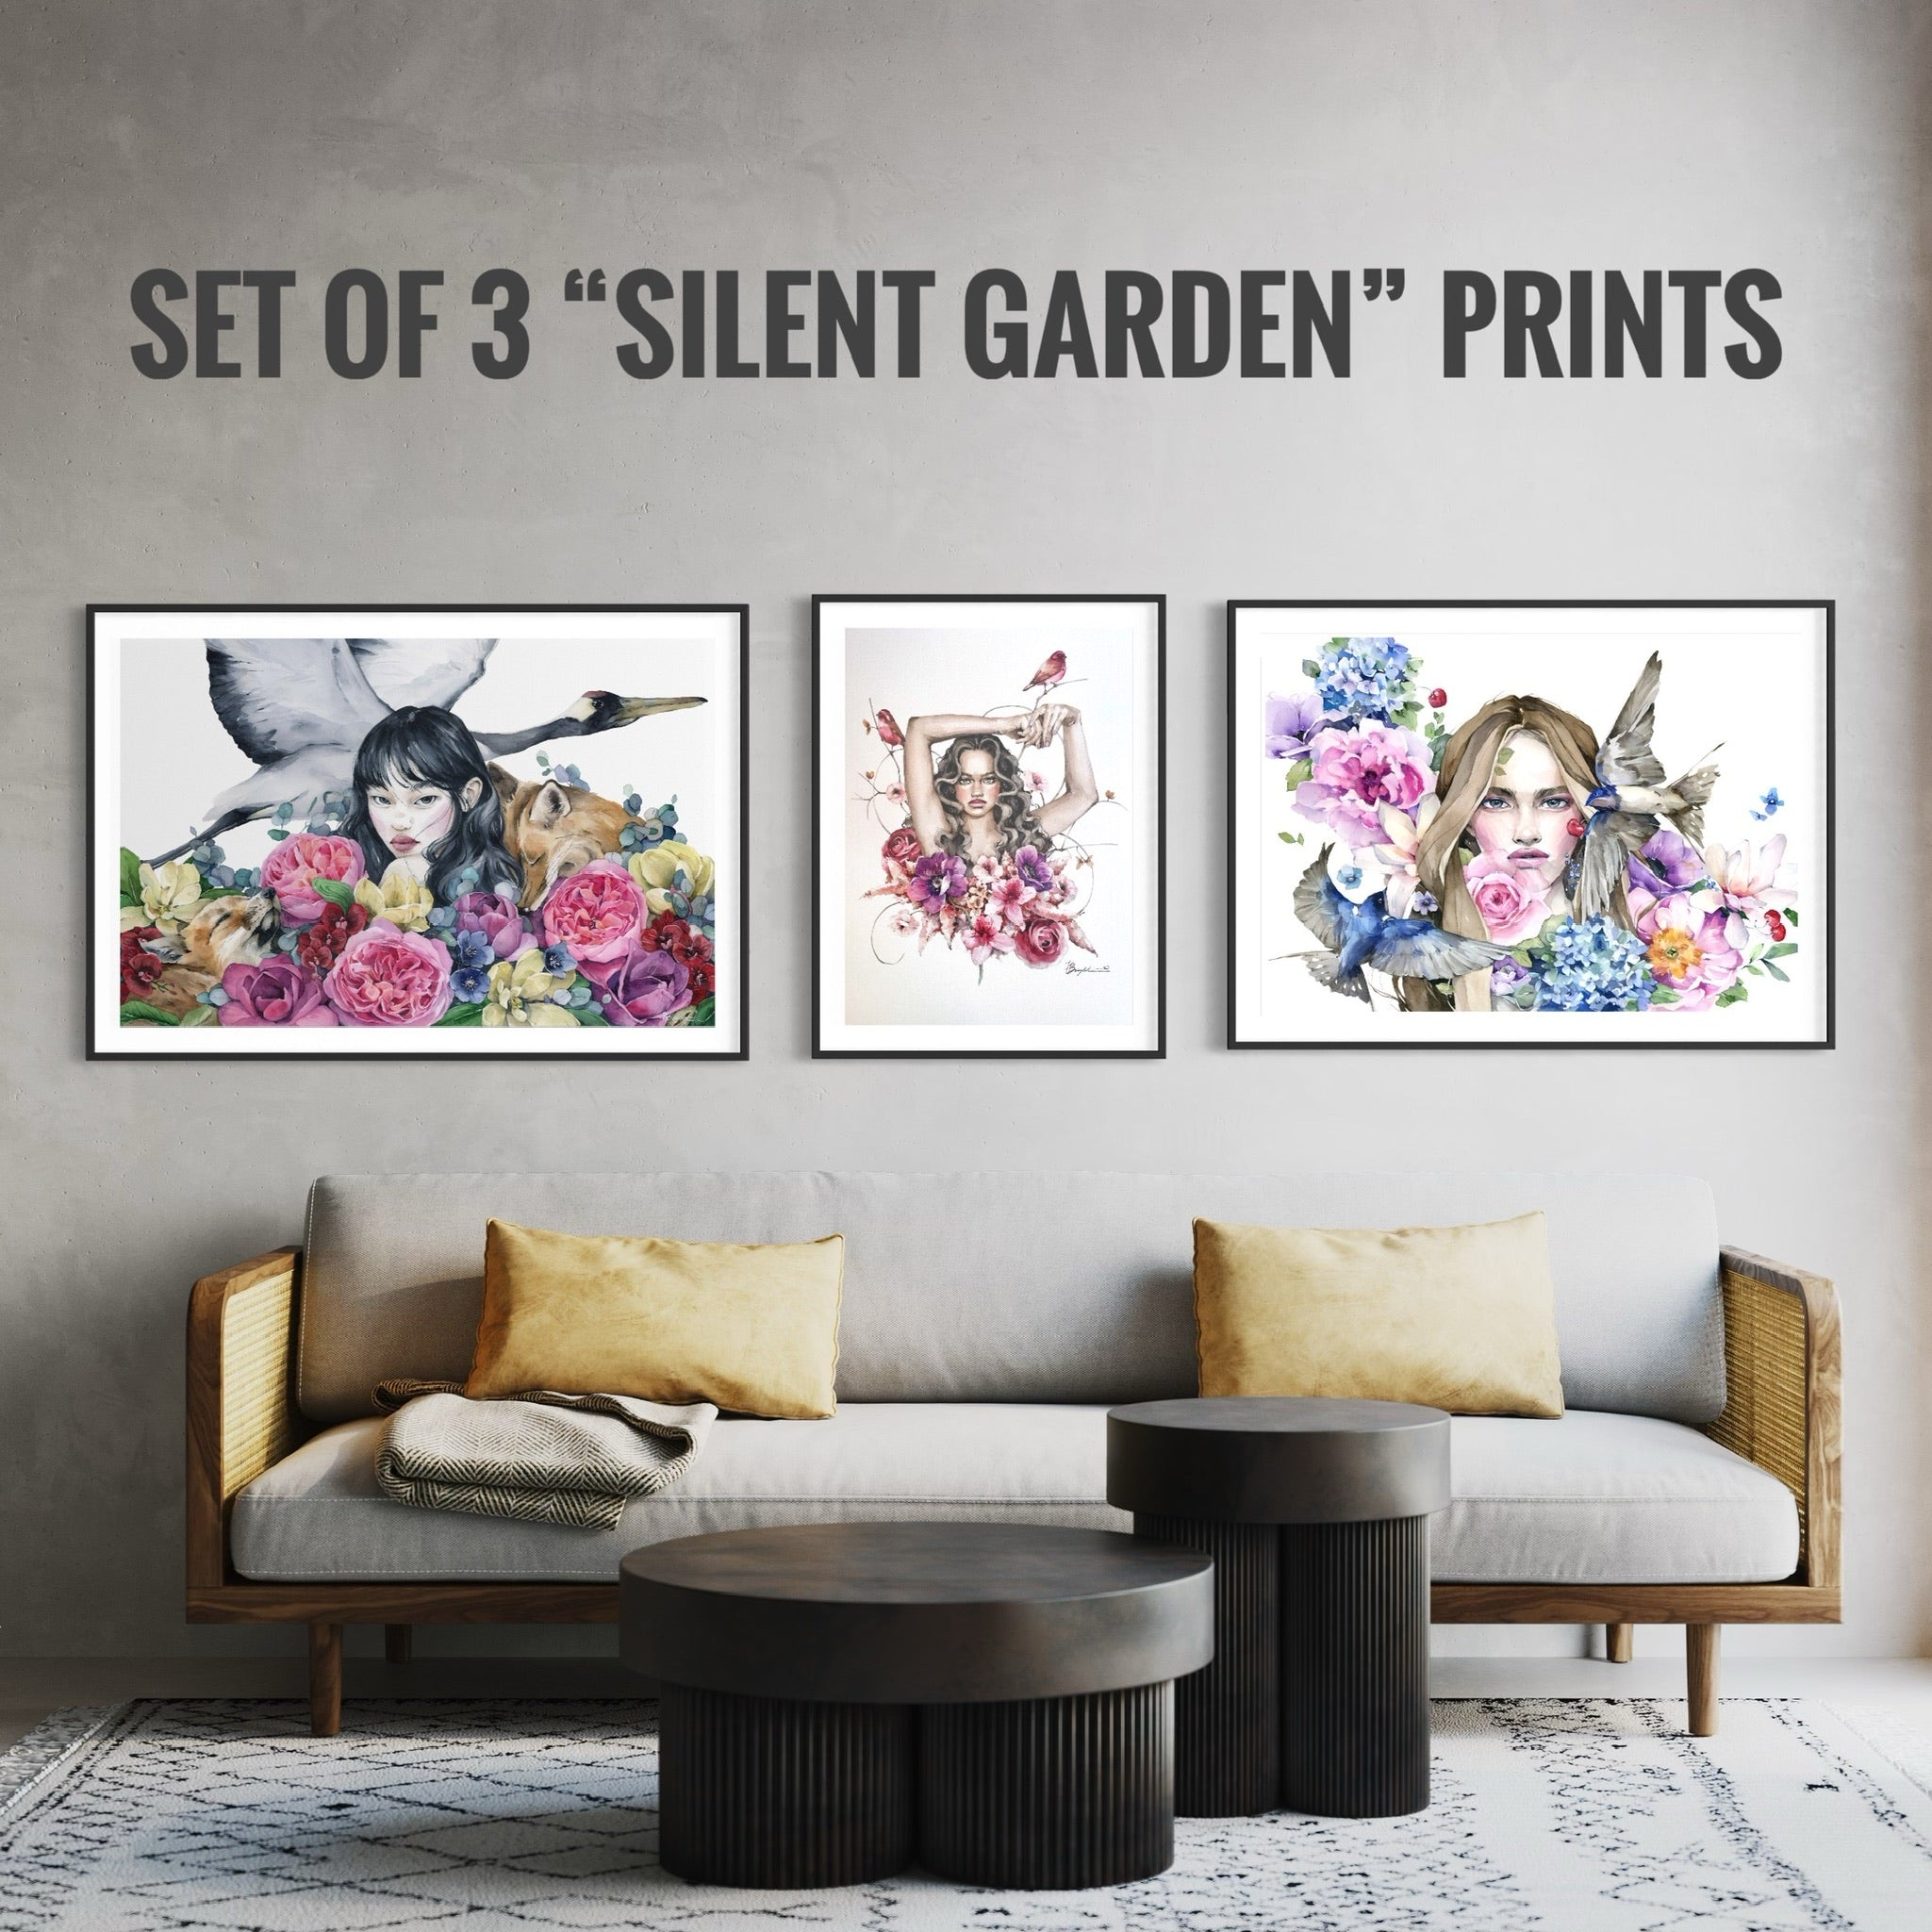 Set of 3 prints from Silent Gardens collection by Polina Bright